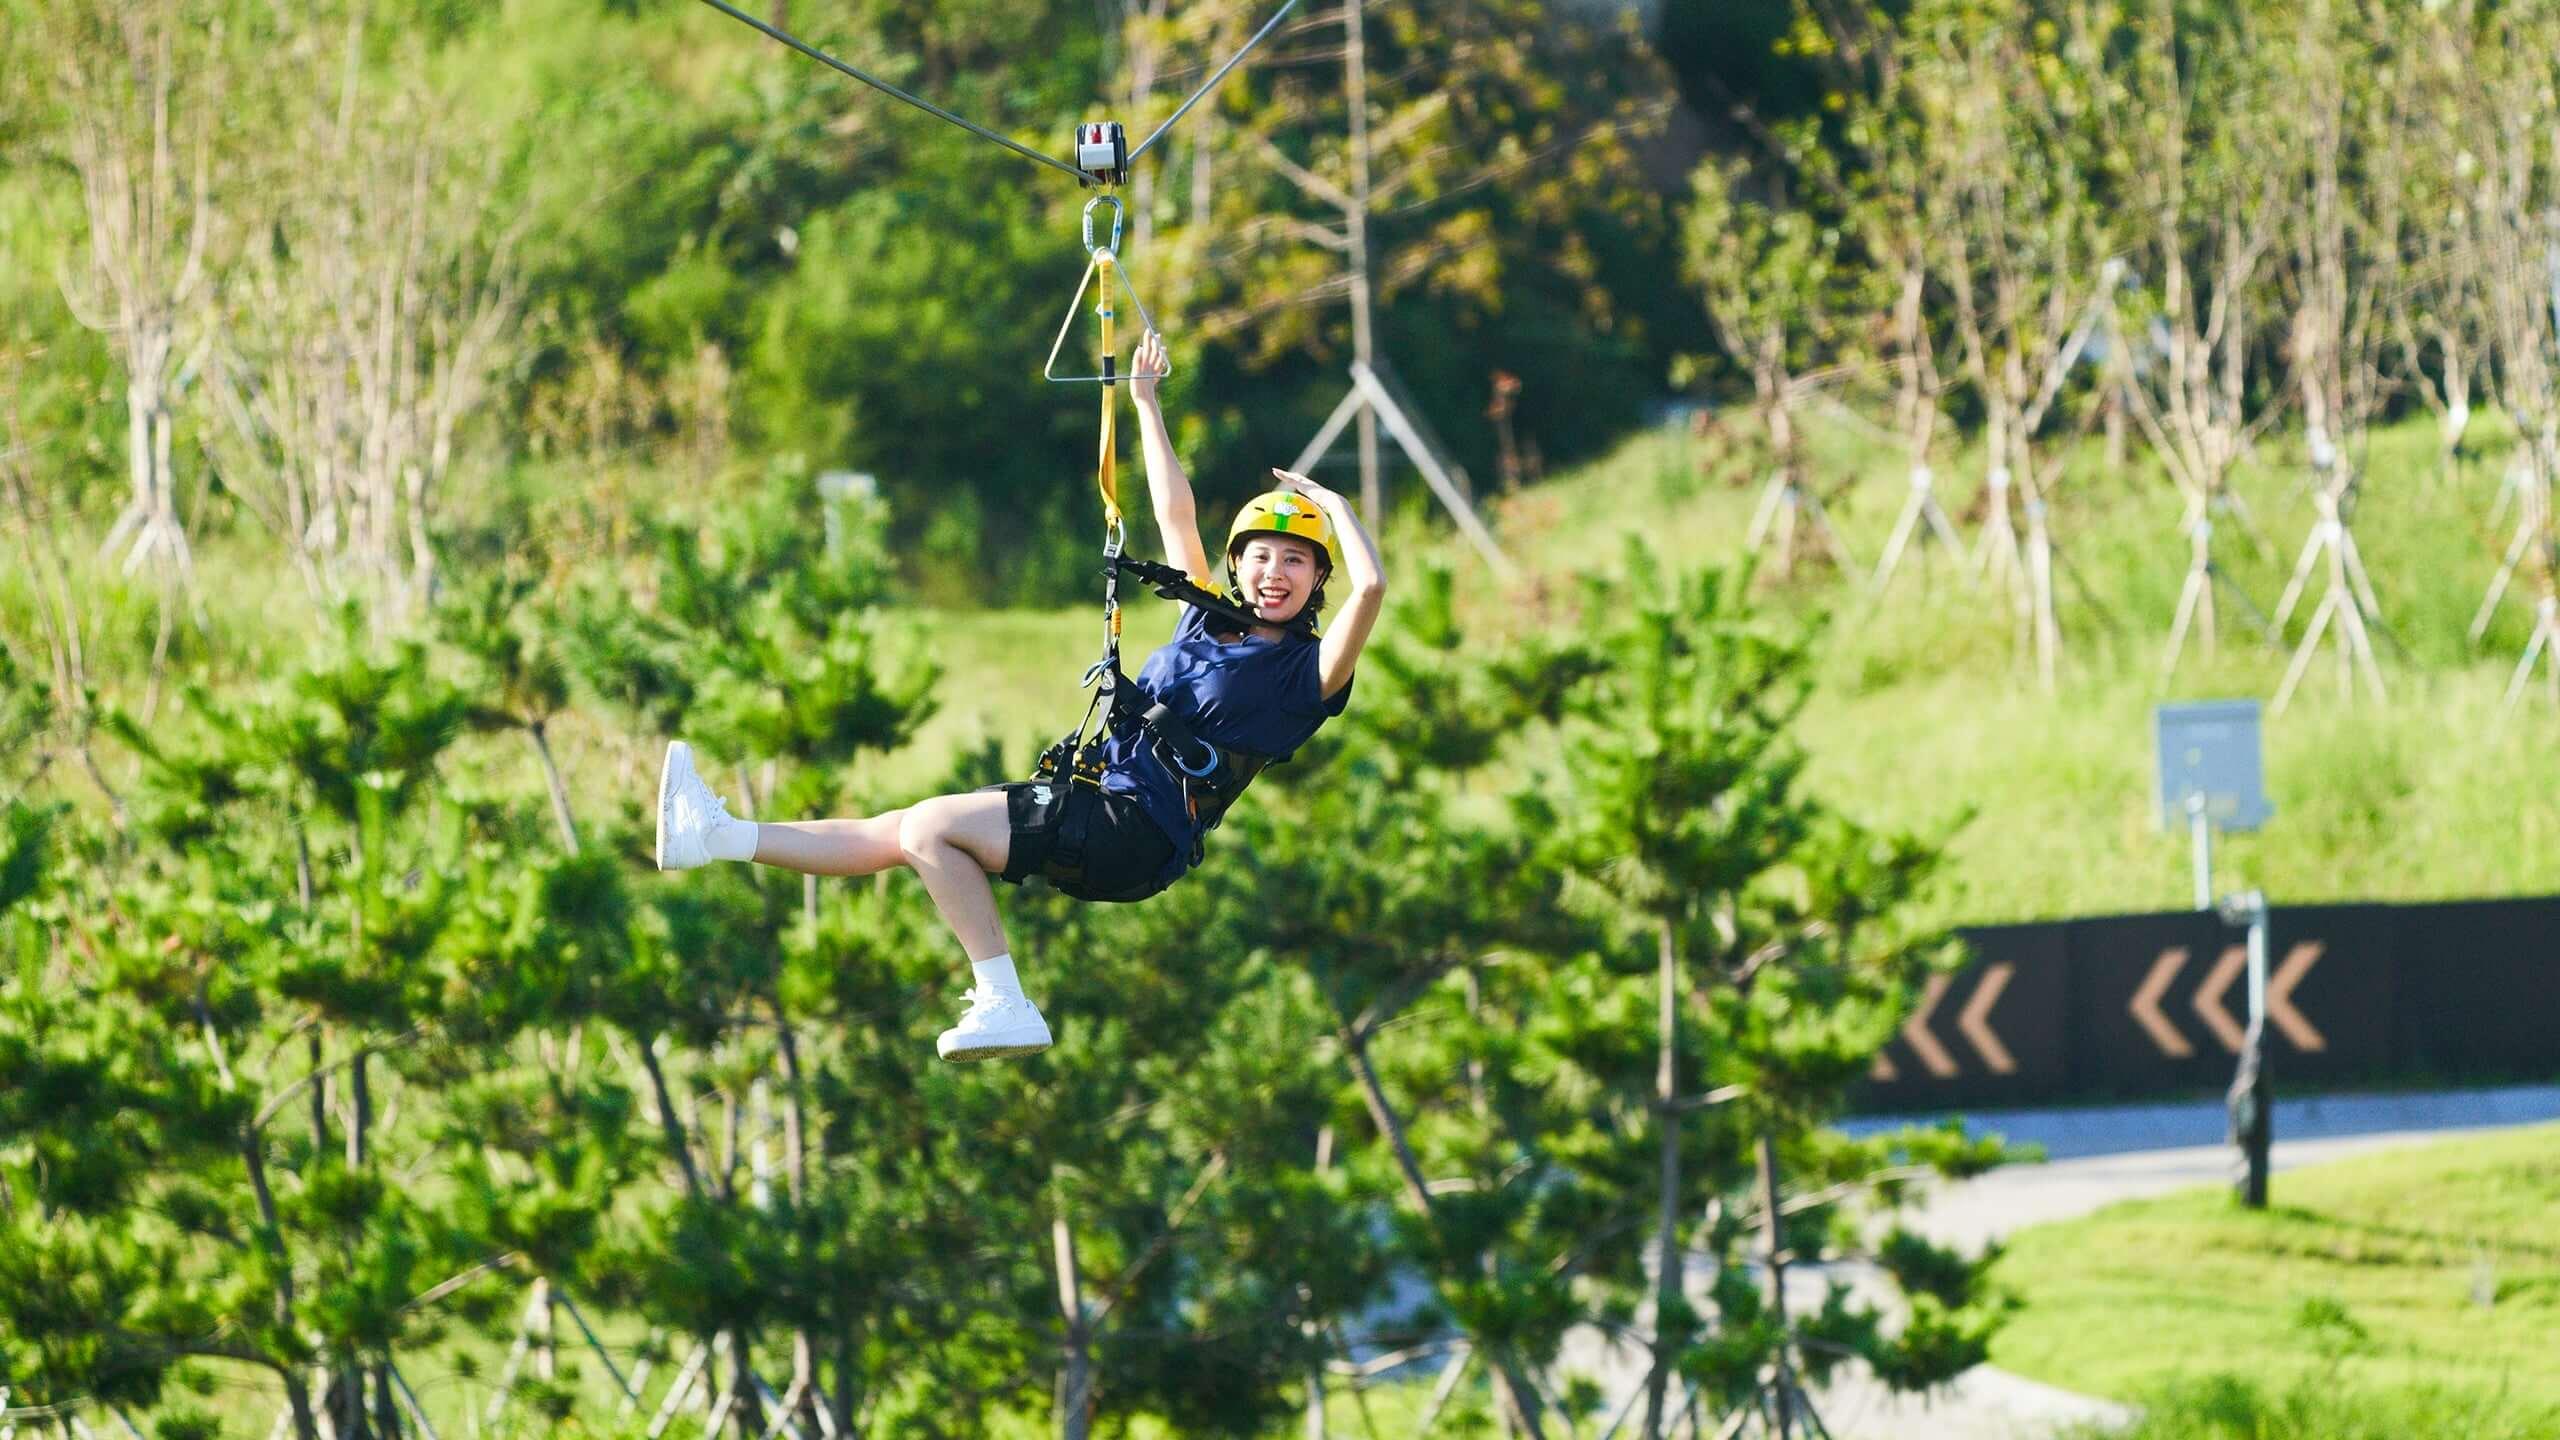 A lady smiles as she nears the end of the Hyfly zipline.